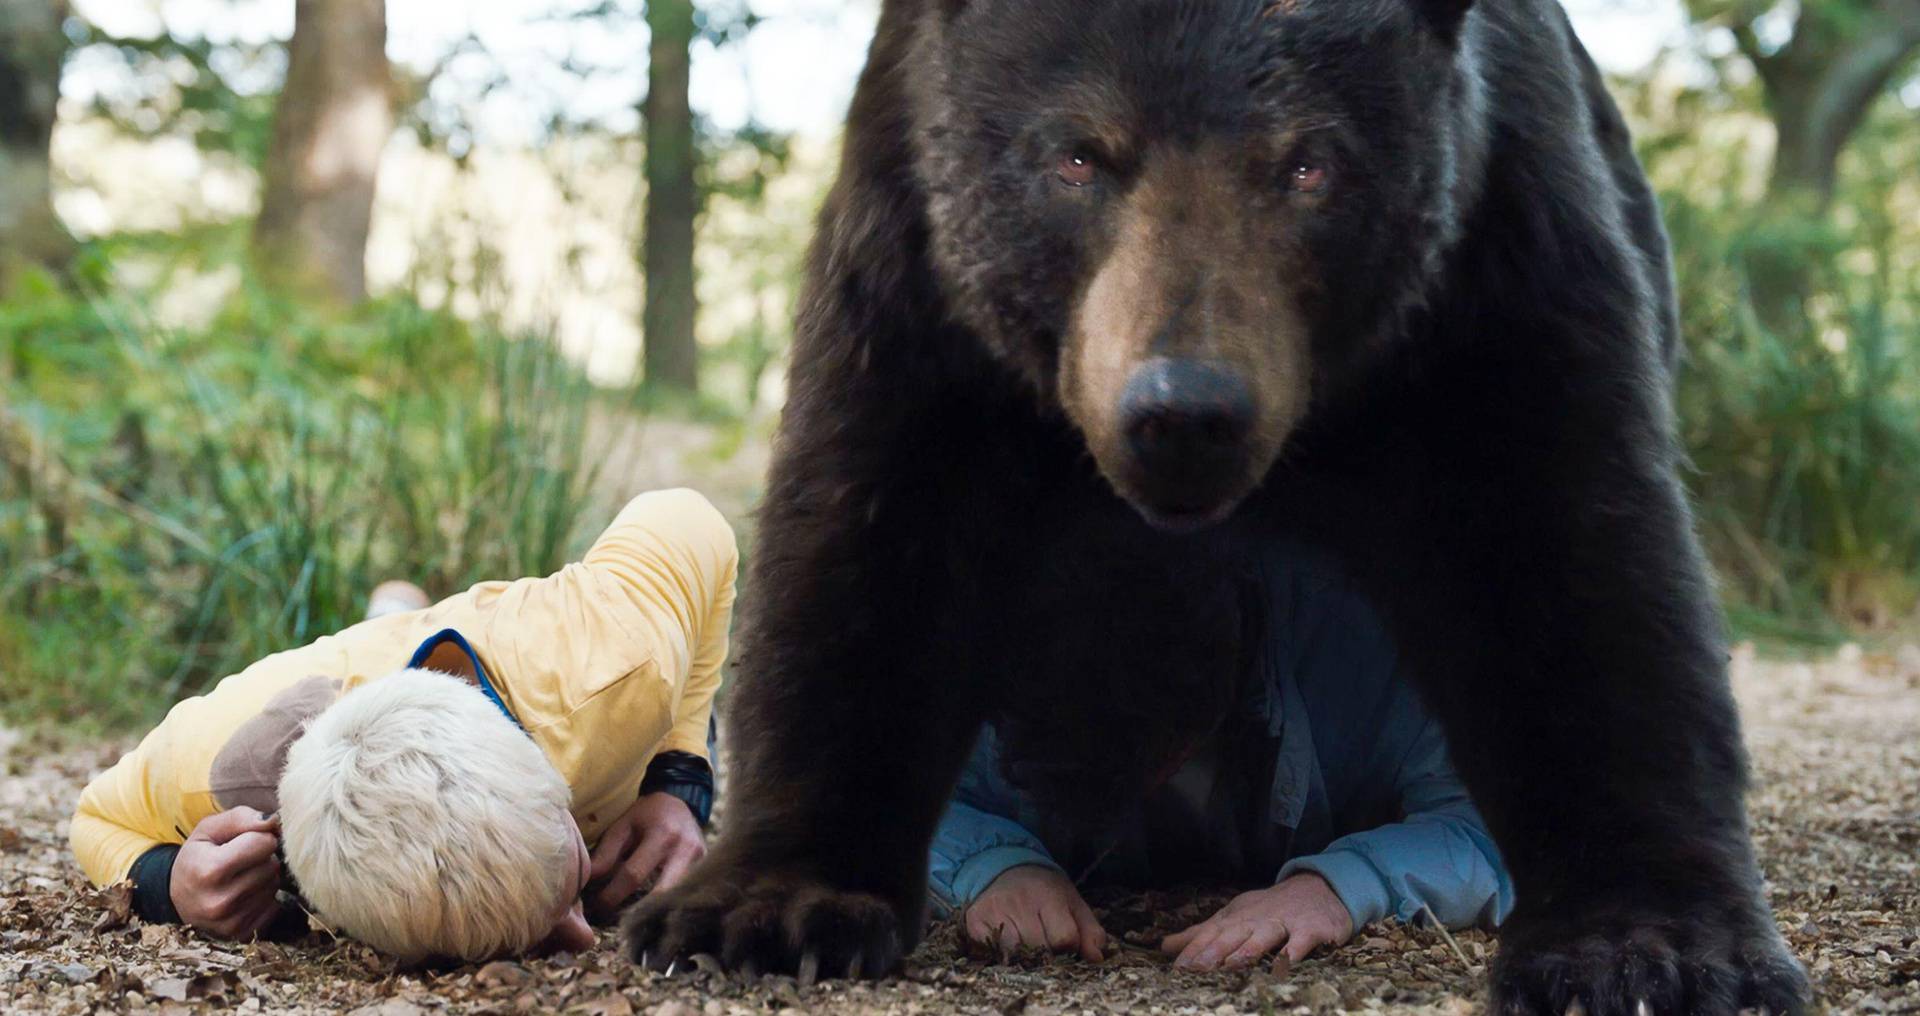 USA. Alden Ehrenreich in a scene from the (C)Universal Pictures new film : Cocaine Bear (2023). 
Plot: An oddball group of cops, criminals, tourists, and teens converge in a Georgia forest where a 500-pound black bear goes on a murderous rampage after uni